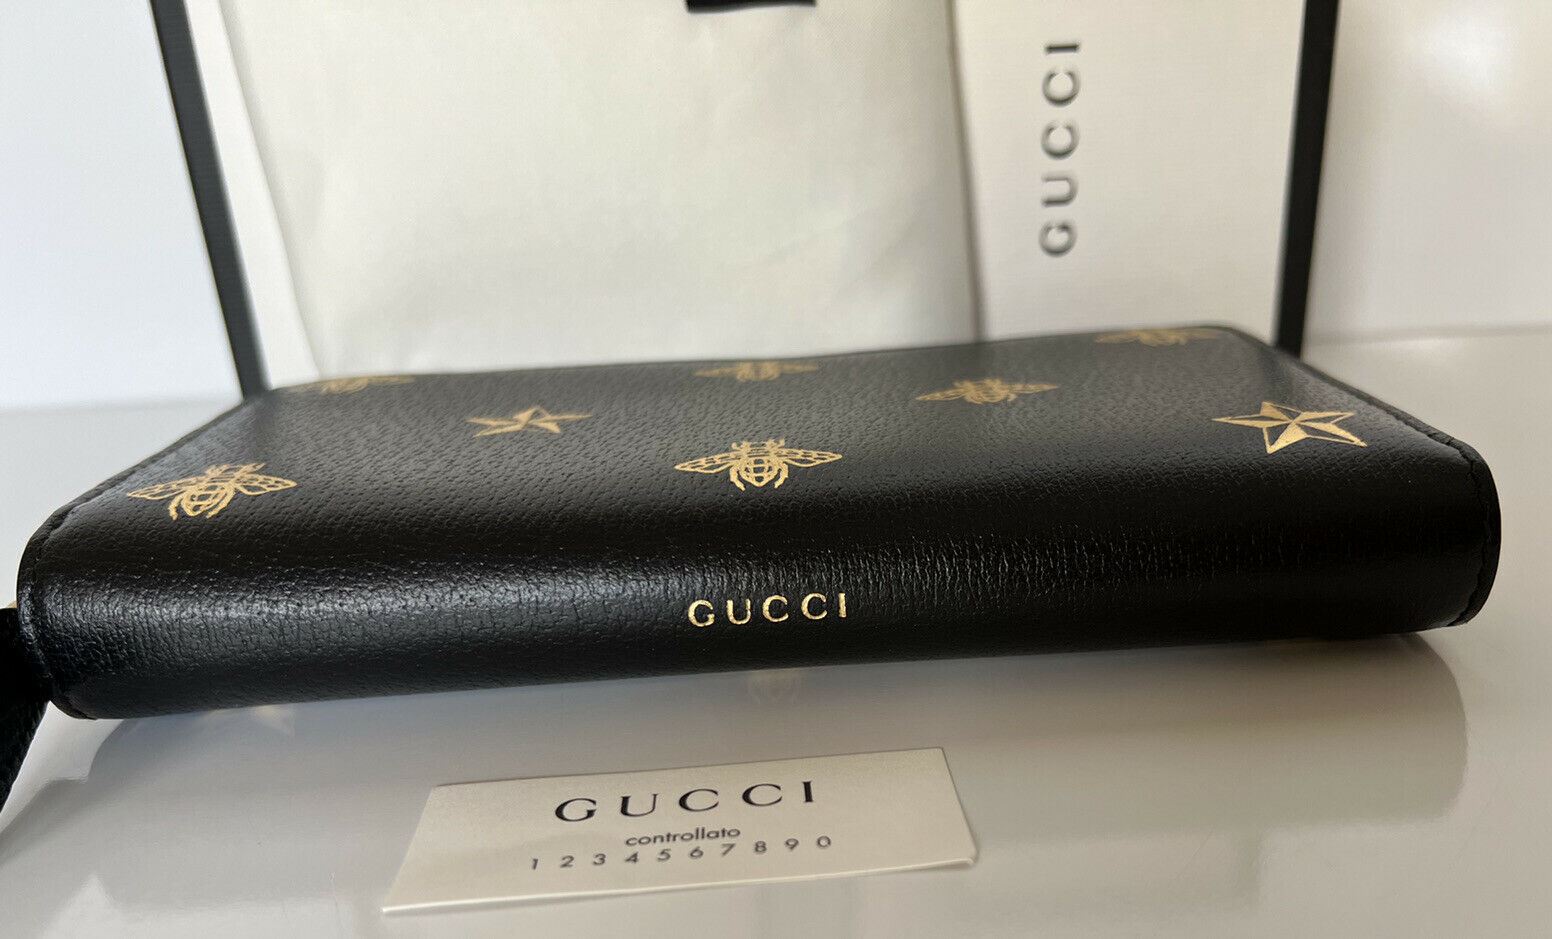 New Gucci Bee Star Gold Print Zip Around Black Leather Wallet Made in Italy